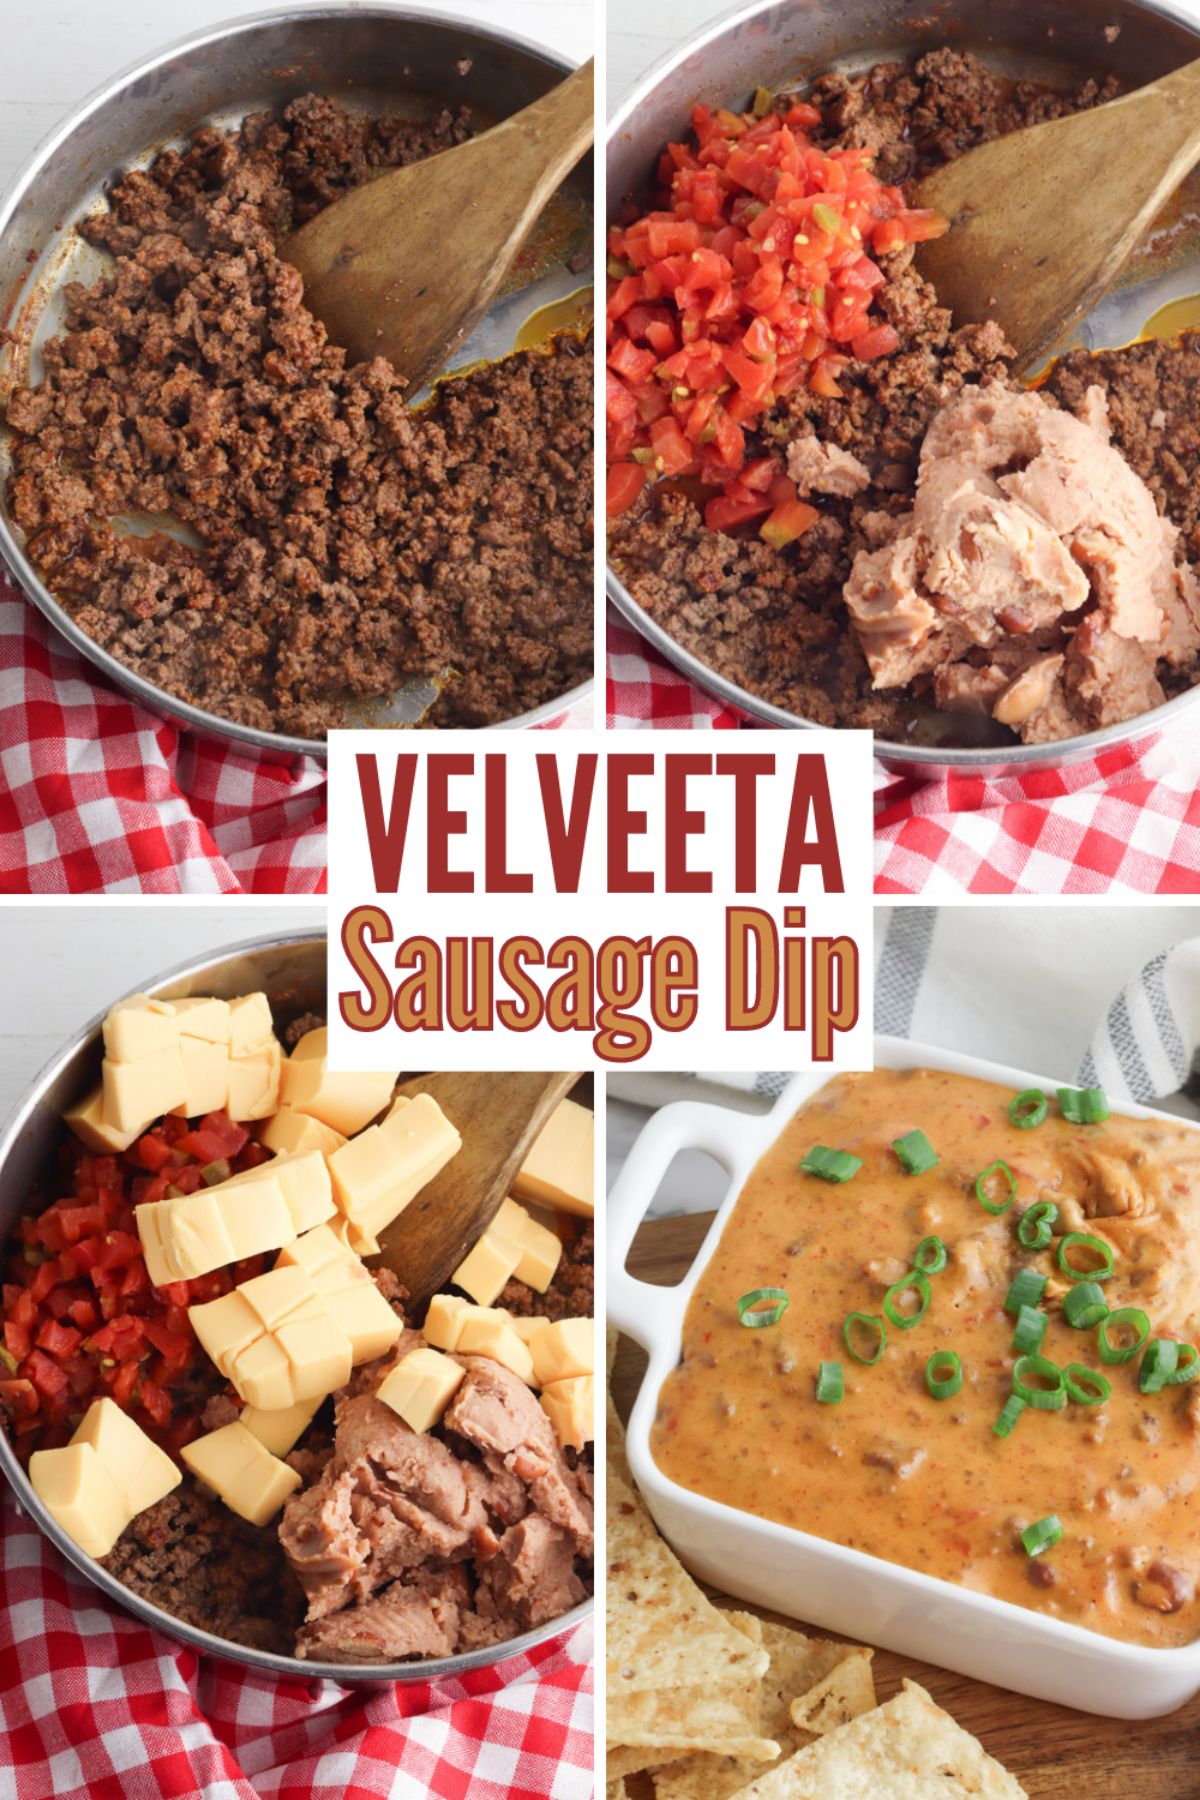 This Velveeta Sausage Dip is hearty, creamy, and perfect for satisfying your cravings. Plus, it’s easy to make and always a hit at parties! #velveetasausagedip #appetizer #sausagedip #velveetacheese via @wondermomwannab